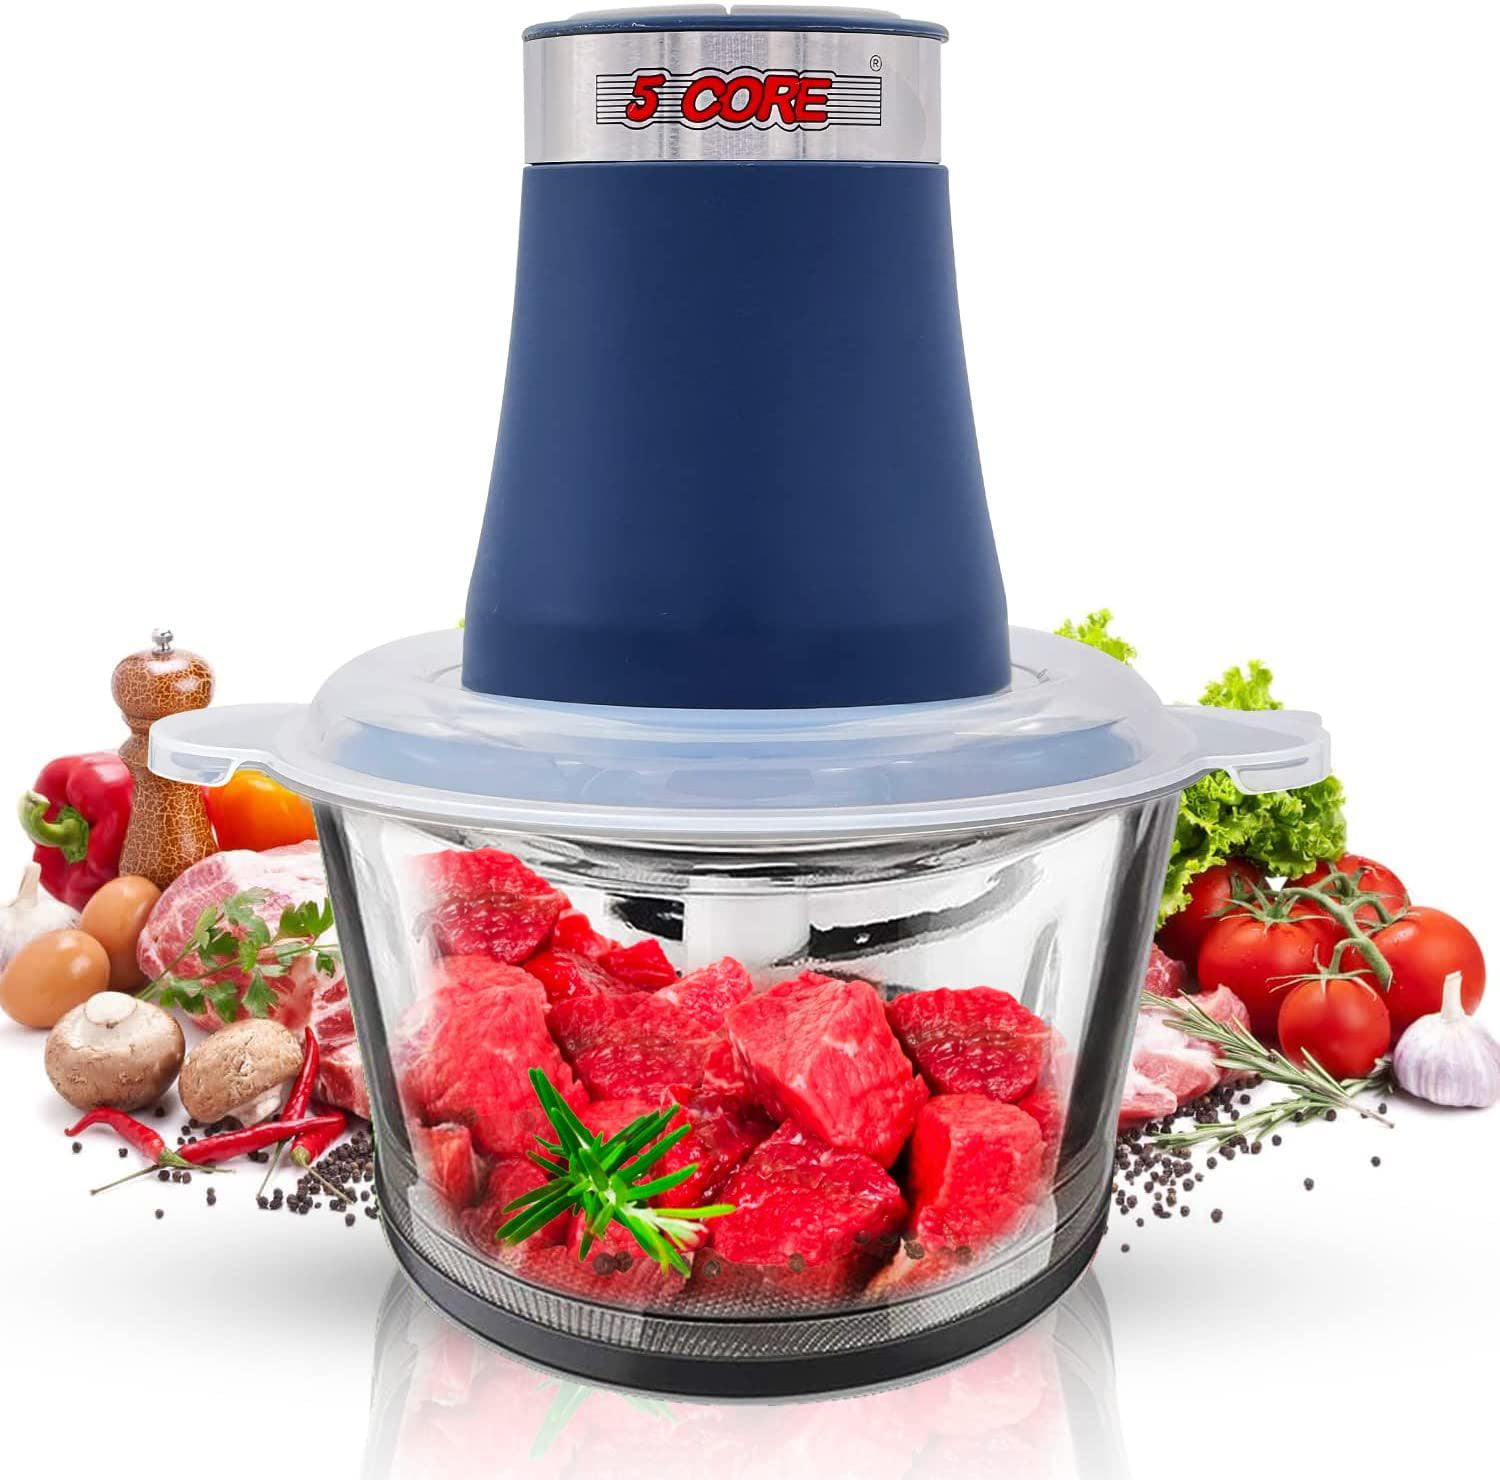 Food Processor - Acekool Small Electric Food Chopper for Vegetables Meat Fruits Nuts Puree - 300W 2 Speed Kitchen Mini Food Processor with Sharp